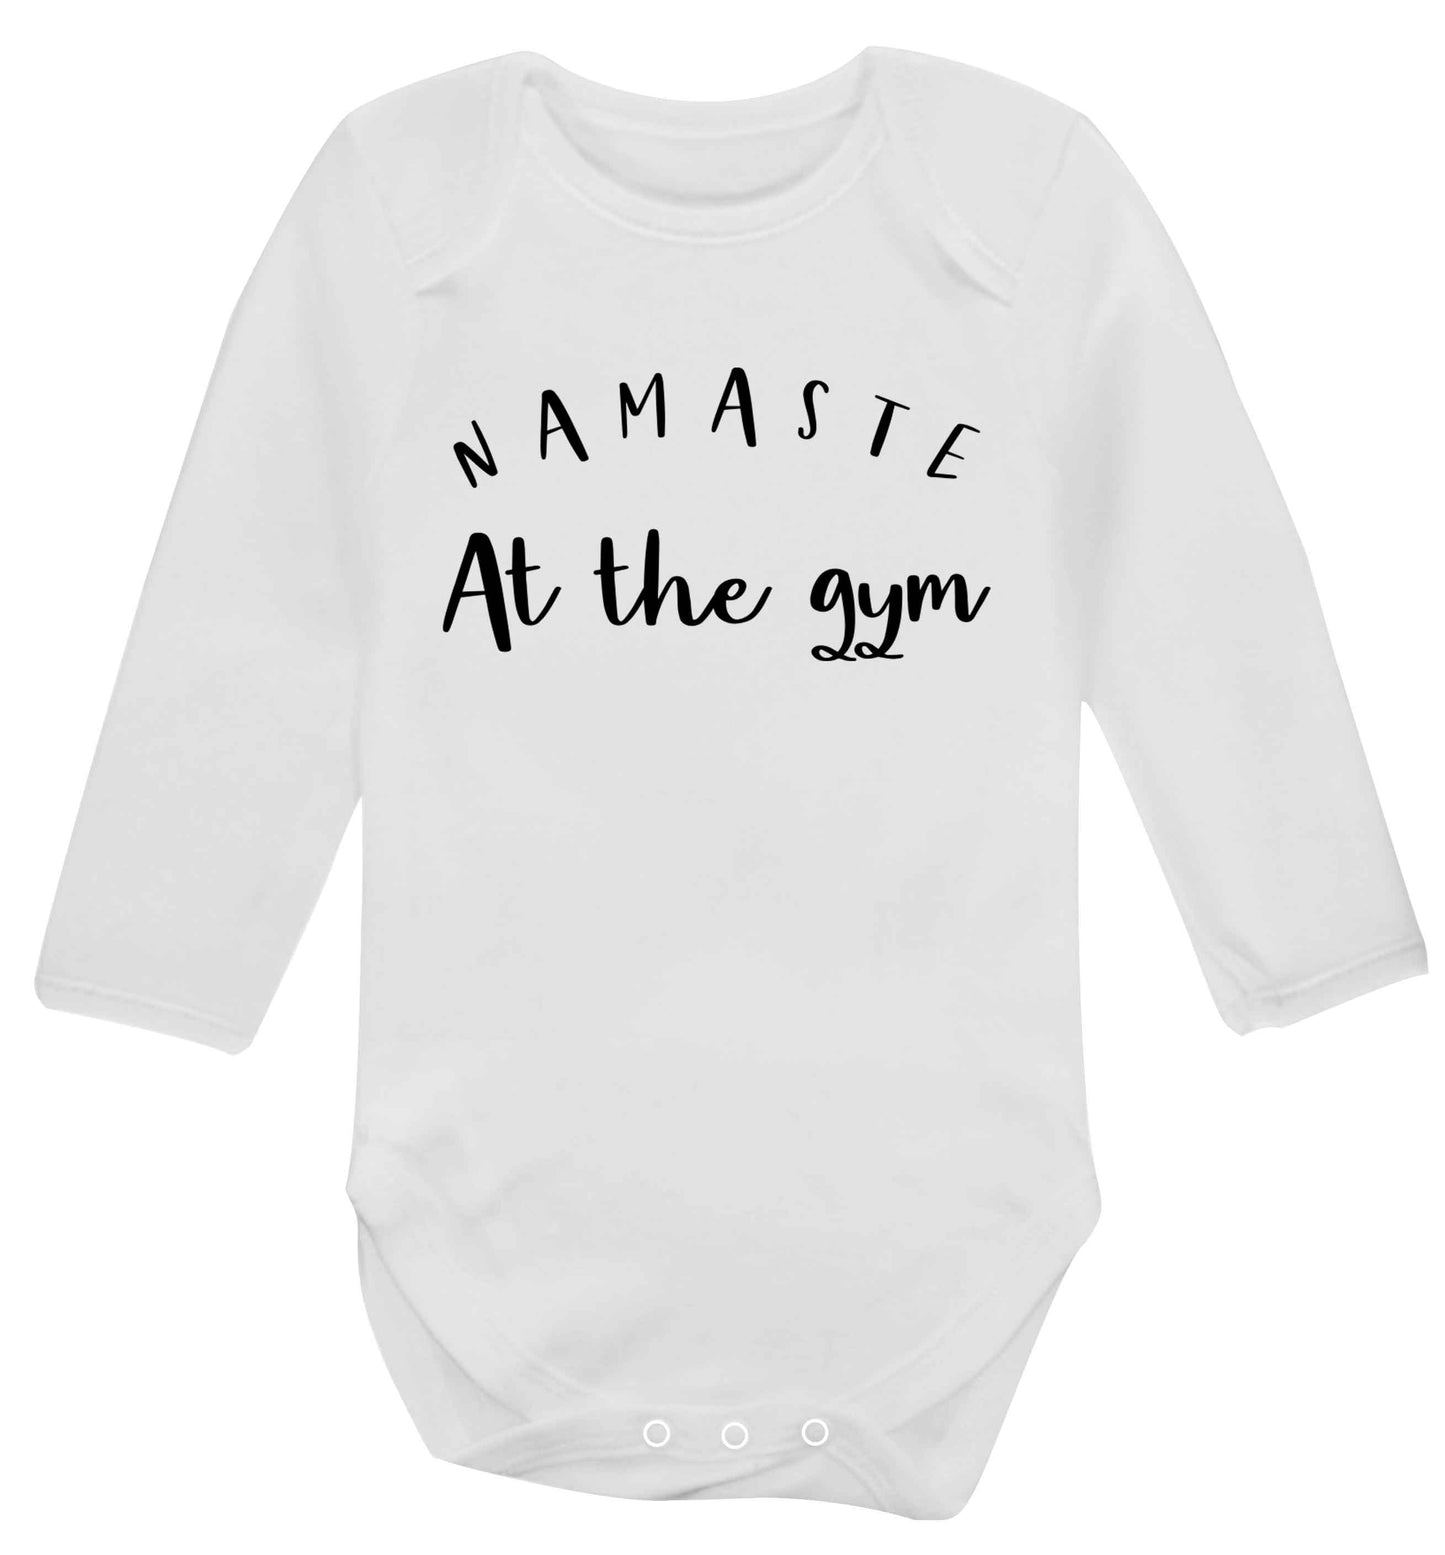 Namaste at the gym Baby Vest long sleeved white 6-12 months